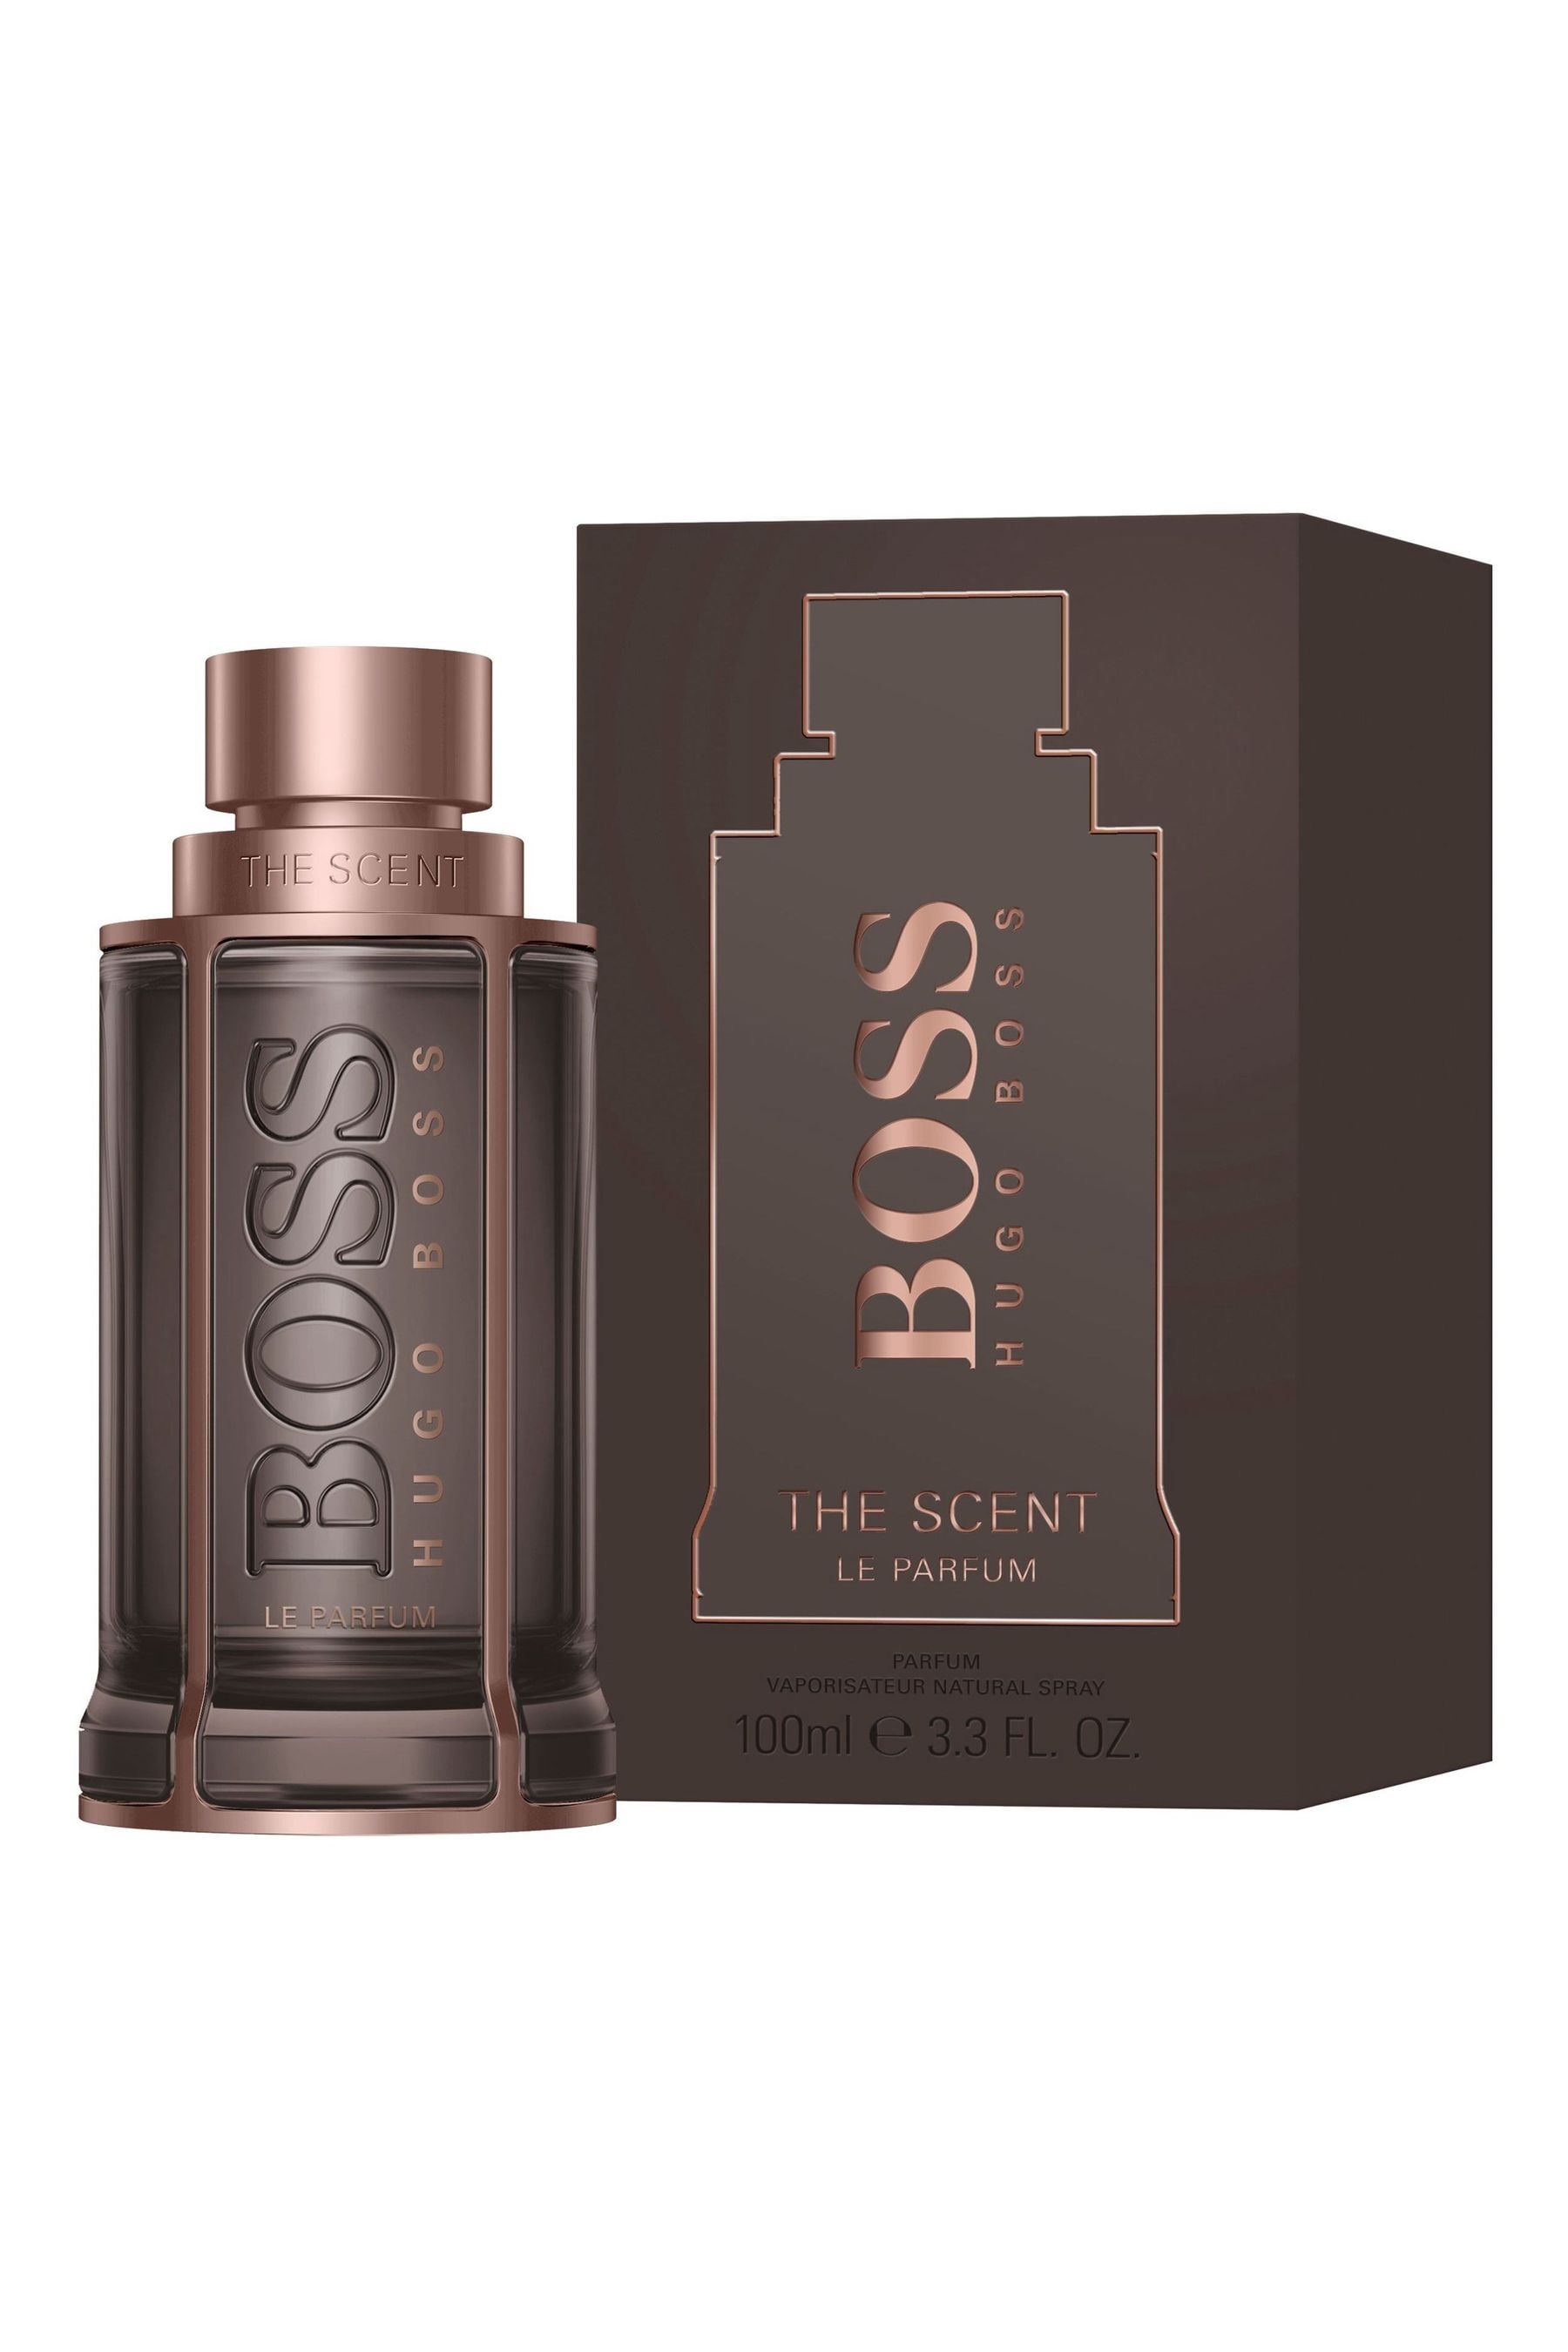 Buy BOSS The Scent Le Parfum for Him 100ml from the Next UK online shop